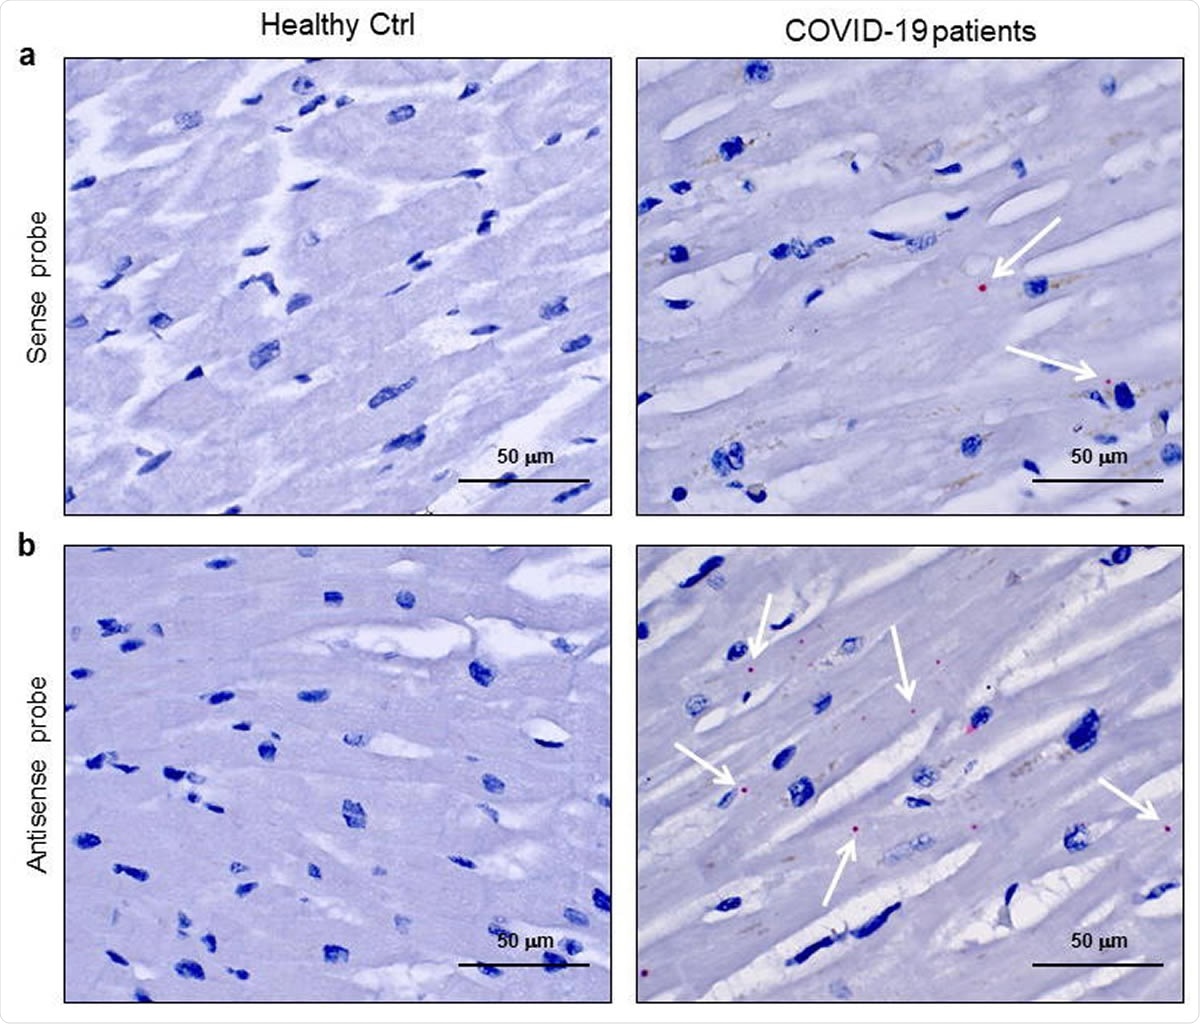 SARS-CoV-2 sense and antisense RNA are localized into cardiomyocytes of COVID-19 patients. a-b) Representative images of spatially resolved viral RNA detection by RNAScope assay on 3μmslides of formalin-fixed paraffin-embedded left ventricle specimens from healthy control (Healthy Ctrl, left panels) and COVID-19 patients (COVID-19, central and right panels) for SARS-CoV-2 sense (a) and antisense (b) probes for spike protein RNA sequences. Fast Red dots indicate viral RNA presence (white arrows). Nuclei have been counterstained with haematoxylin. Magnification as scale bars.